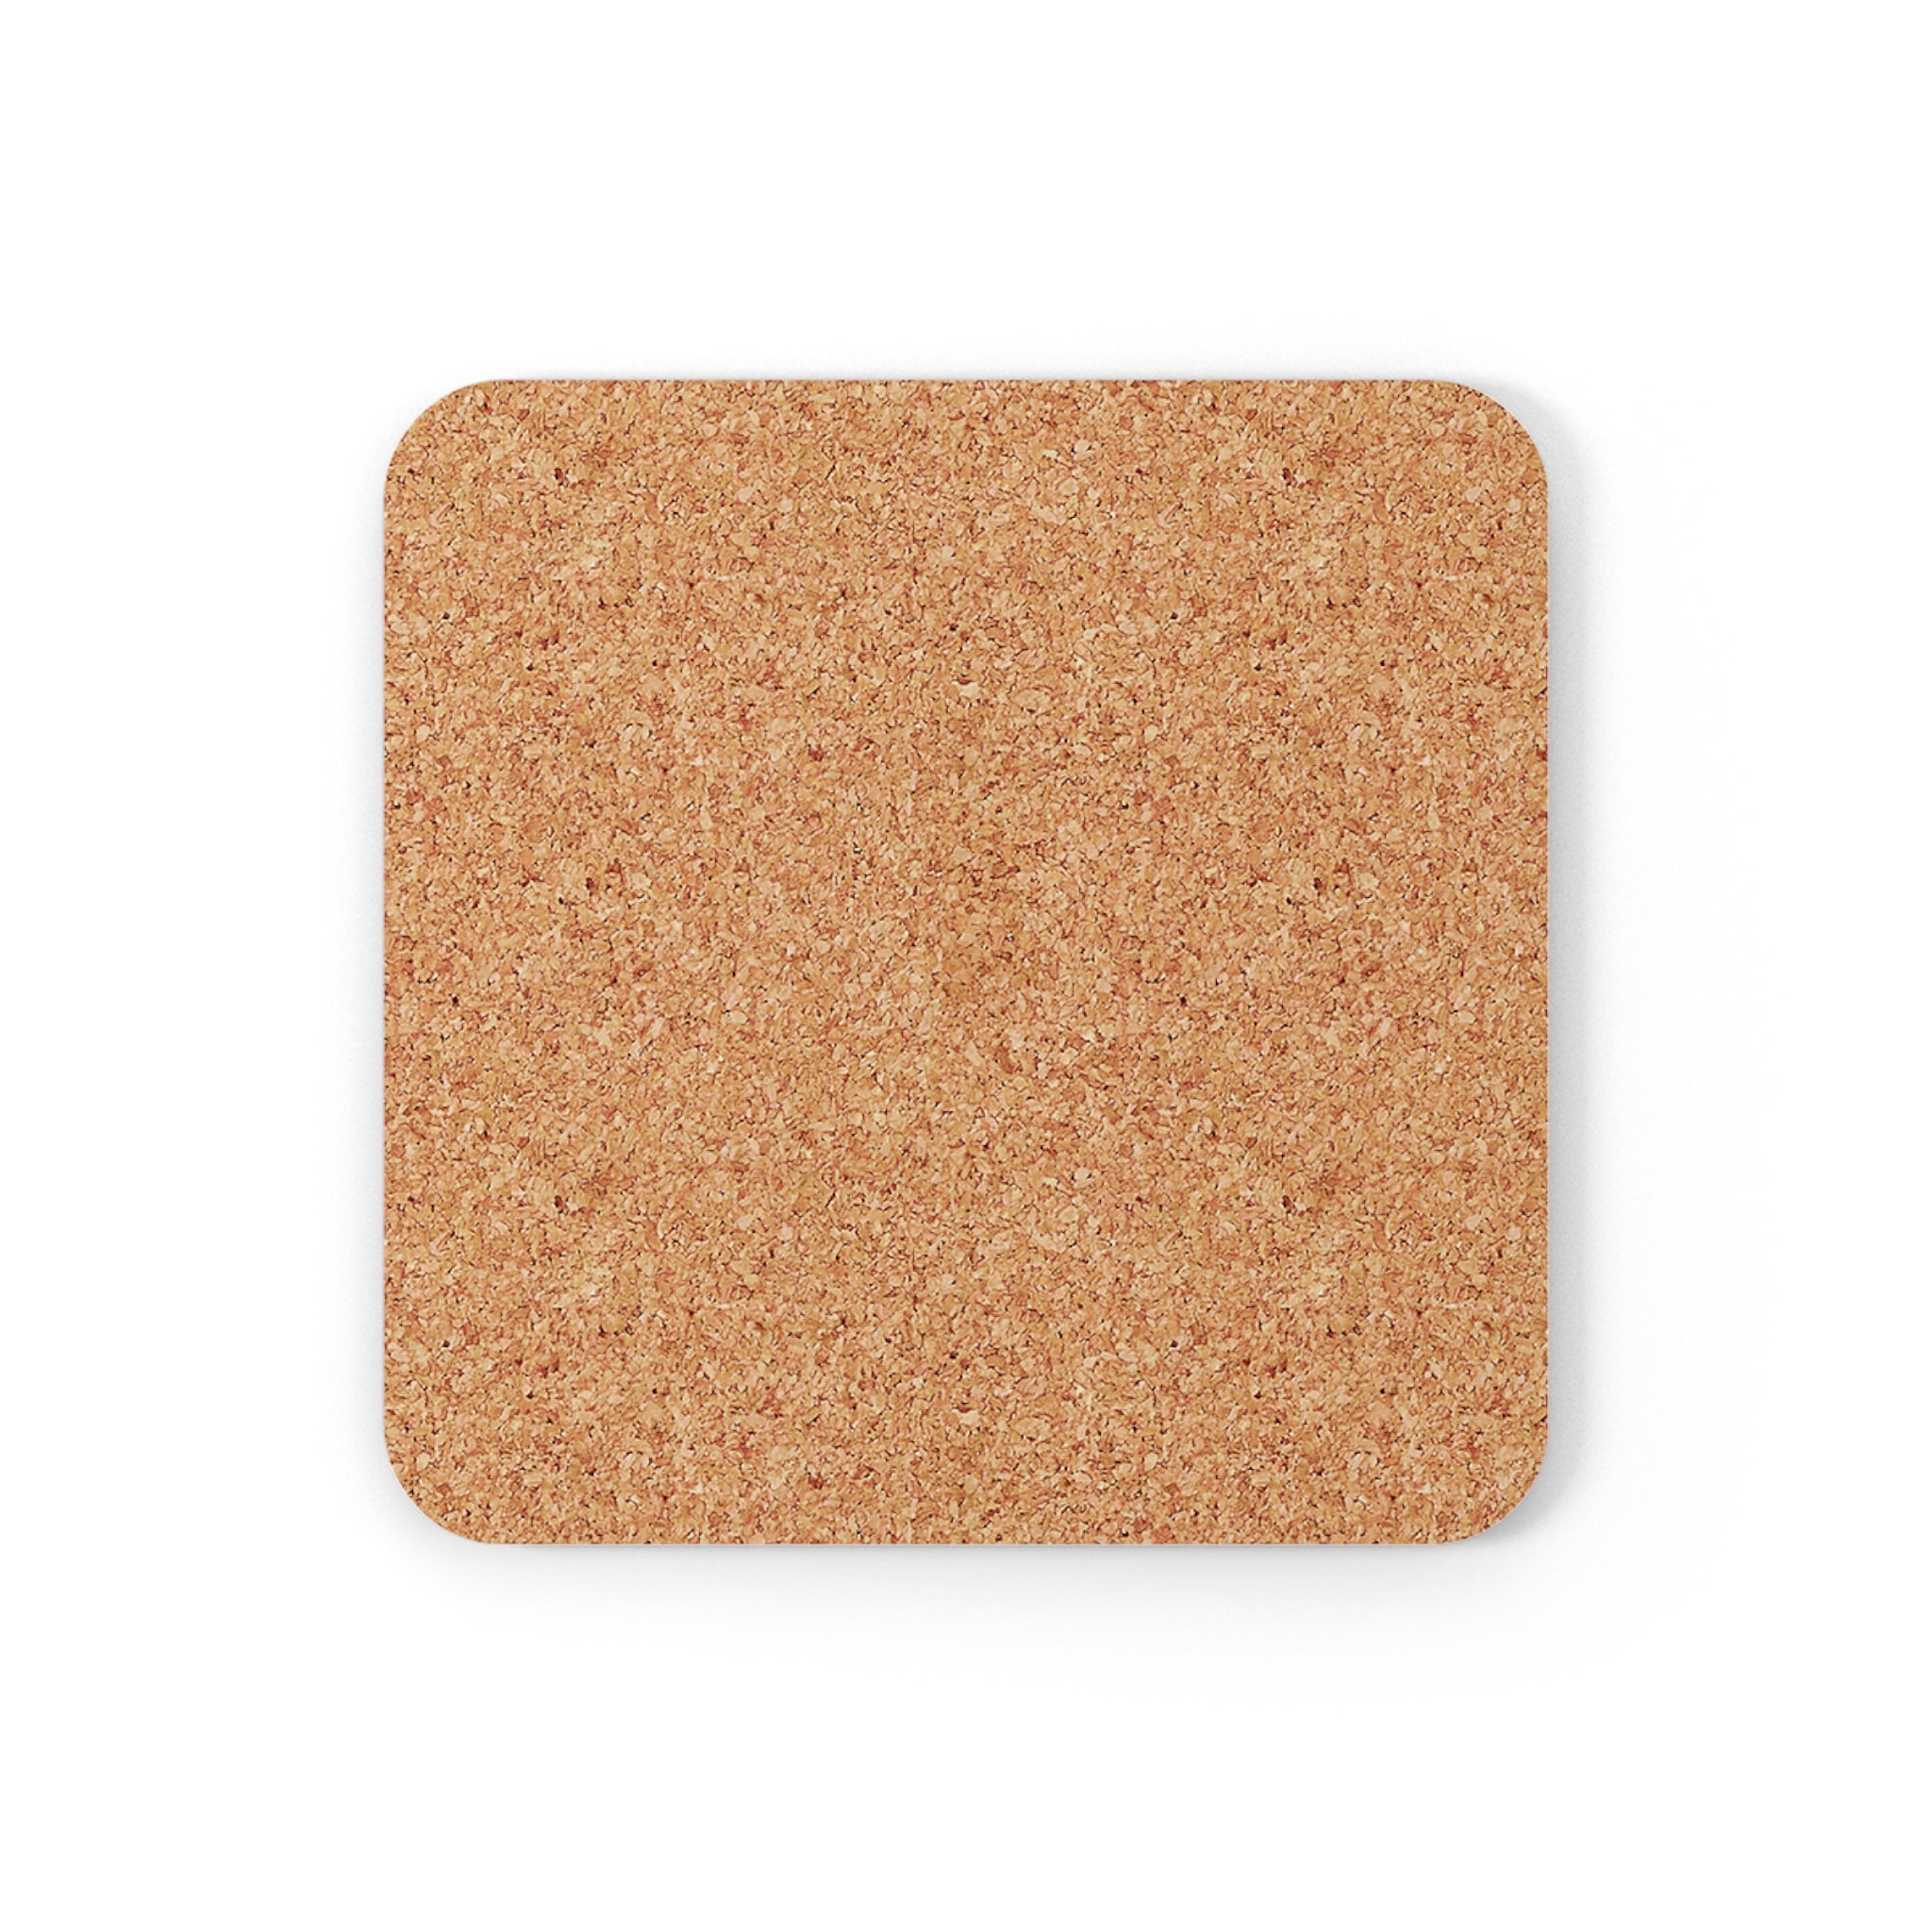 Galley Container Style Corkwood Coaster Set - I Love a Hangar